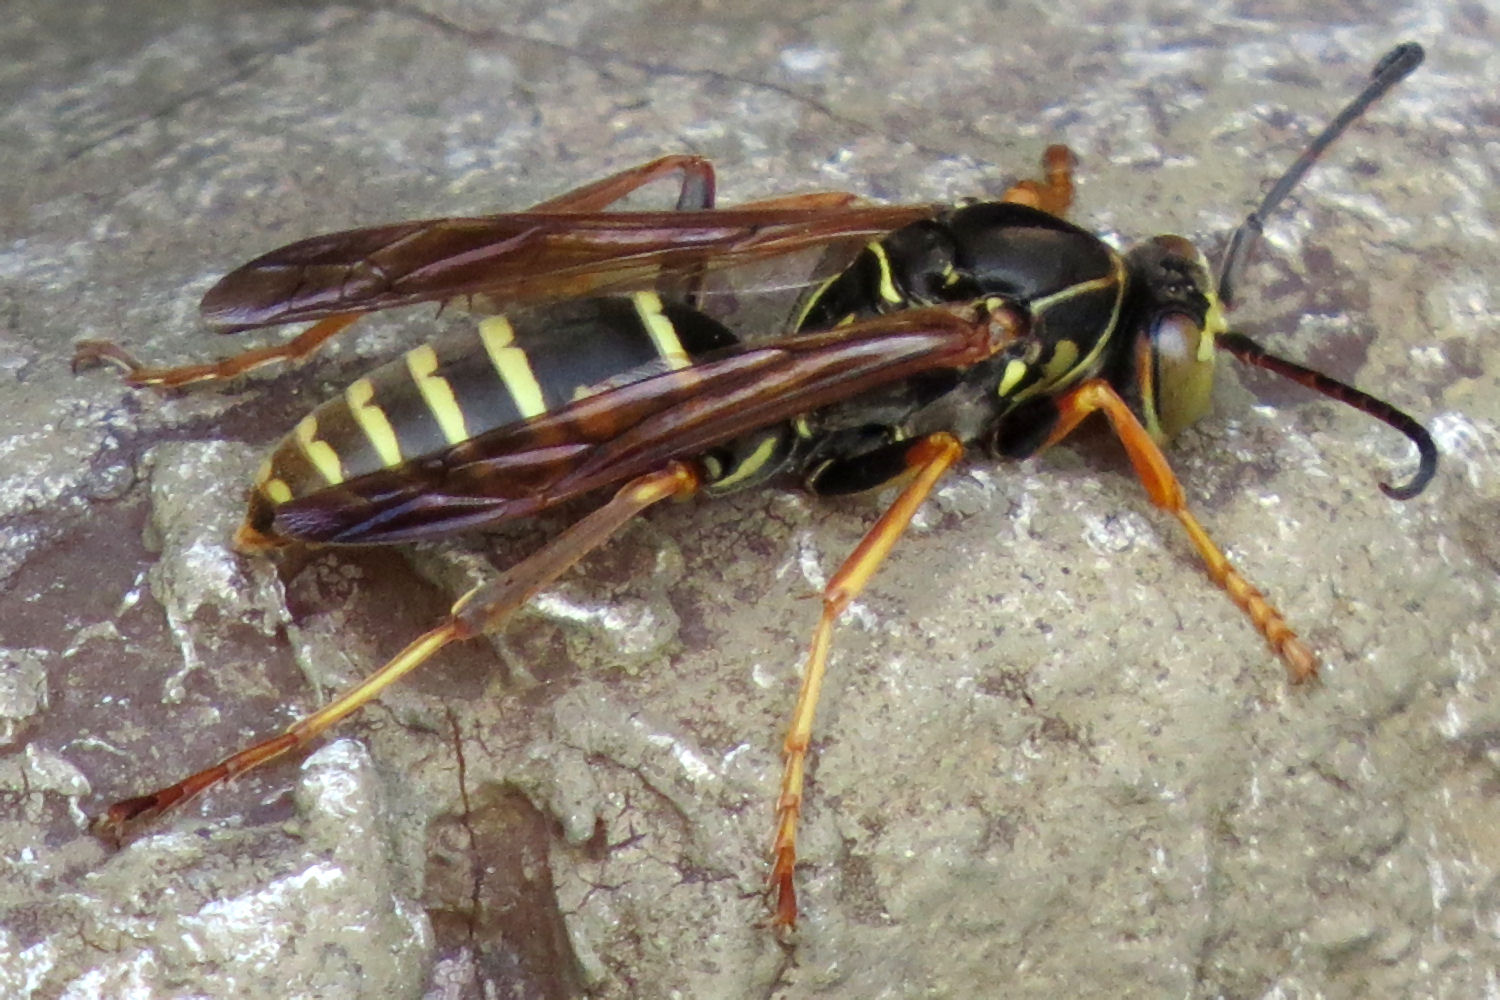 Sleek, high speed insect rests on a concrete surface. Northern Paper Wasp has 4 smoke-colored membranous wings and abdomen marked with prominent yellow bands, connected to its thorax by a threadlike petiole, inspiring the term “wasp waist.” 6 yellow-brown legs, yellow face stripes and curved-end antennae complete the ensemble.